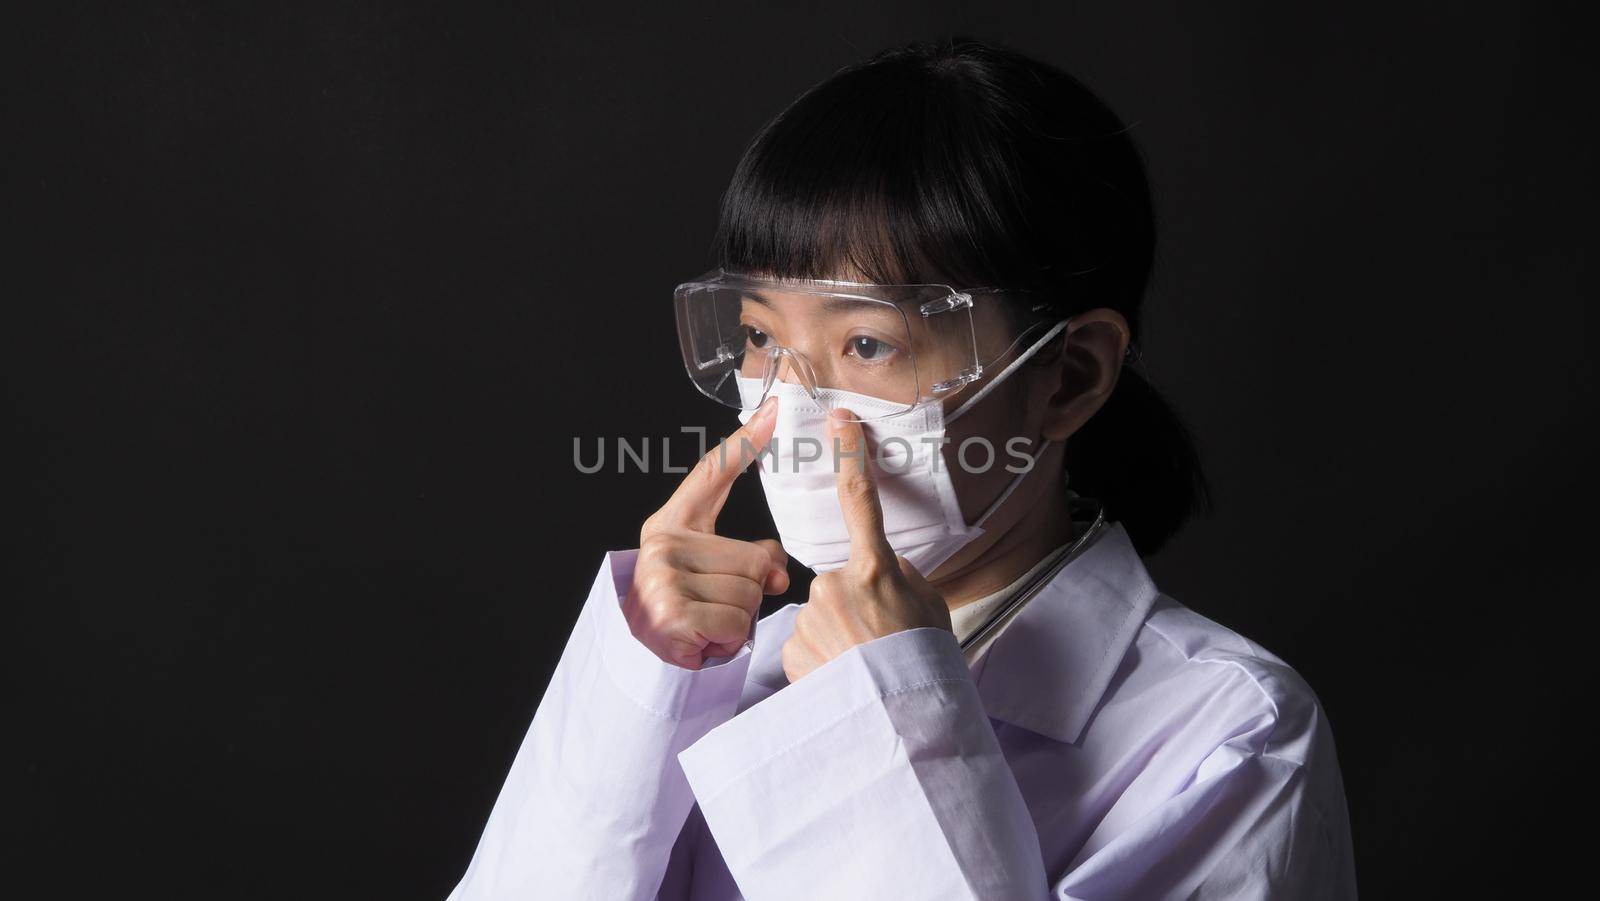 Doctor Wearing Medical Mask and clear goggles or glasses and stethoscope on the neck and white uniform. Asian female doctor or scientist in protective facial masks on black background. protect Covid 19 concept.
 
